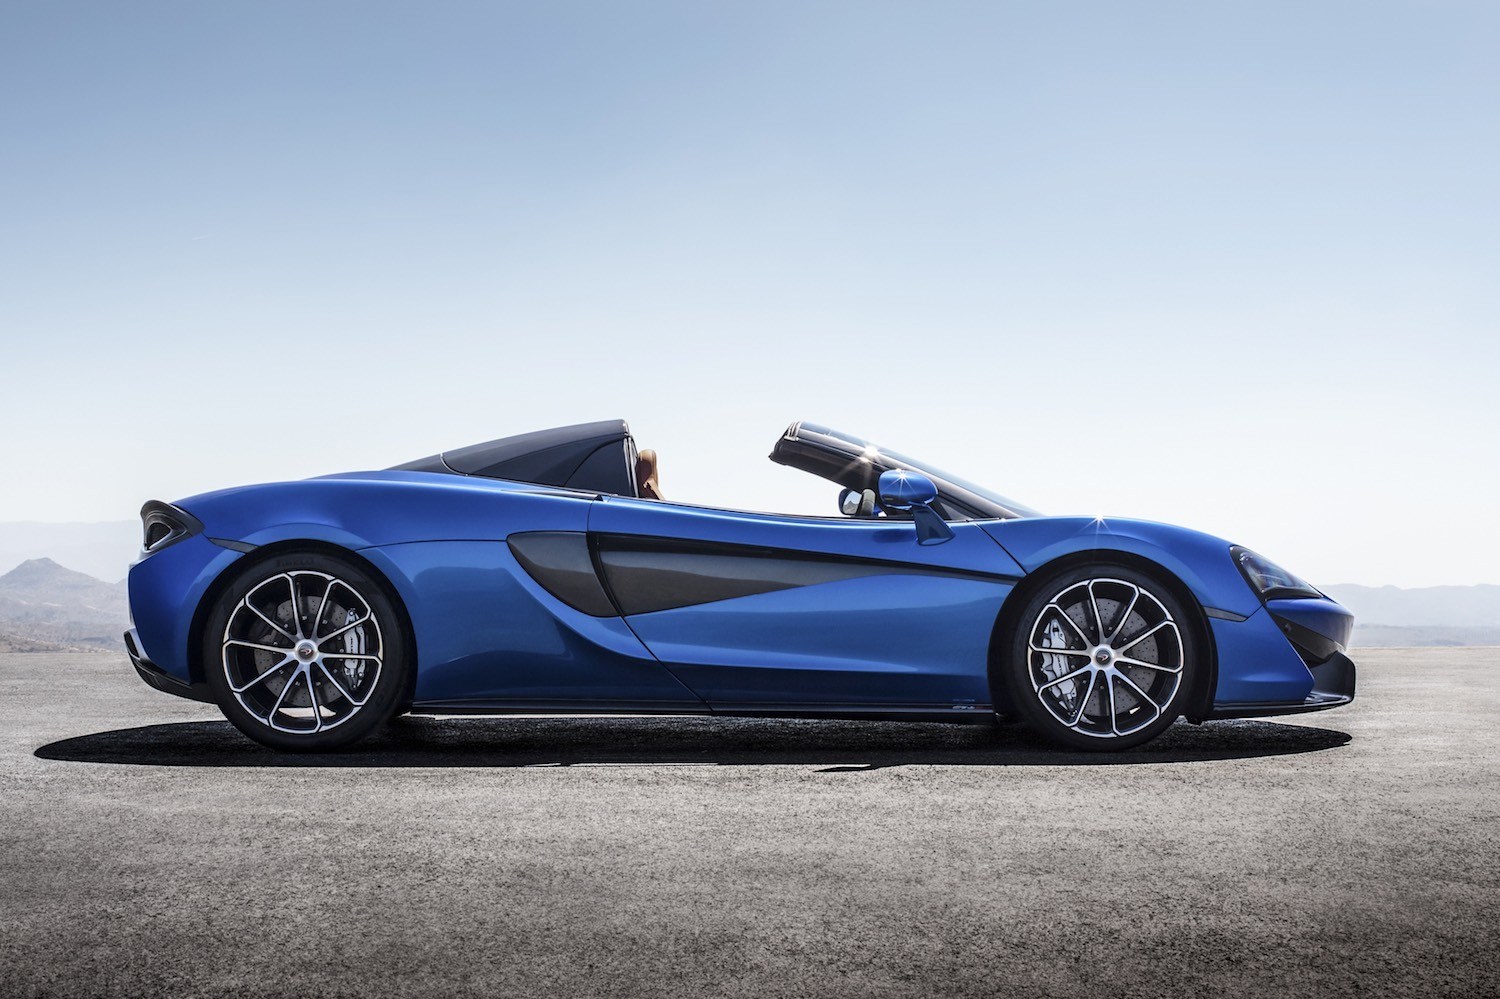 Neil Lyndon reviews the latest New McLaren 720S Spider for Drive 5